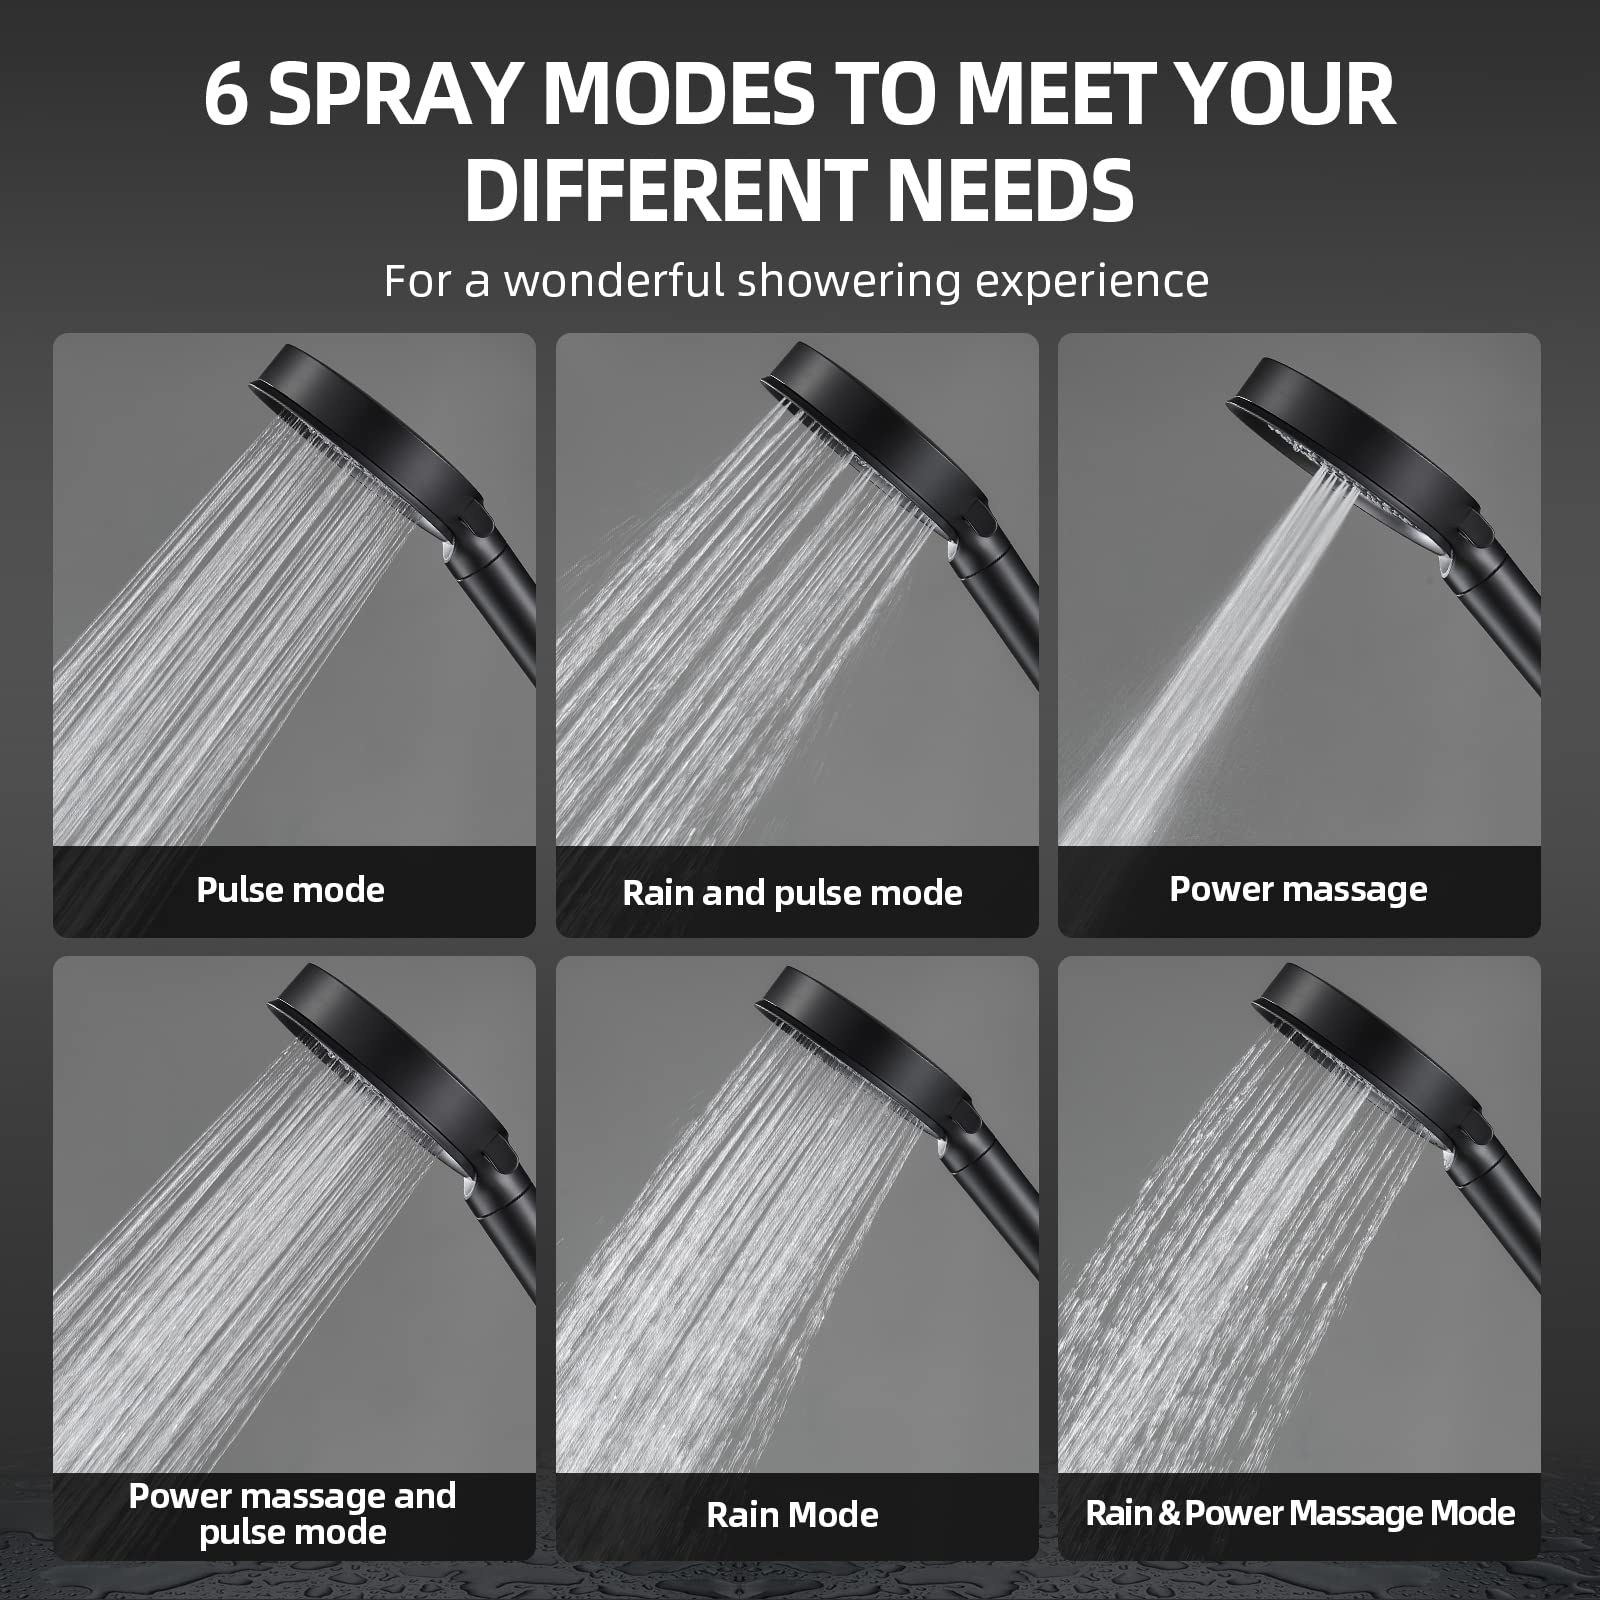 Cobbe Filtered Shower Head with Handheld, High Pressure 6 Spray Mode Showerhead with Filters, Water Softener Filters Beads for Hard Water - Remove Chlorine - Reduces Dry Itchy Skin, Matte Black